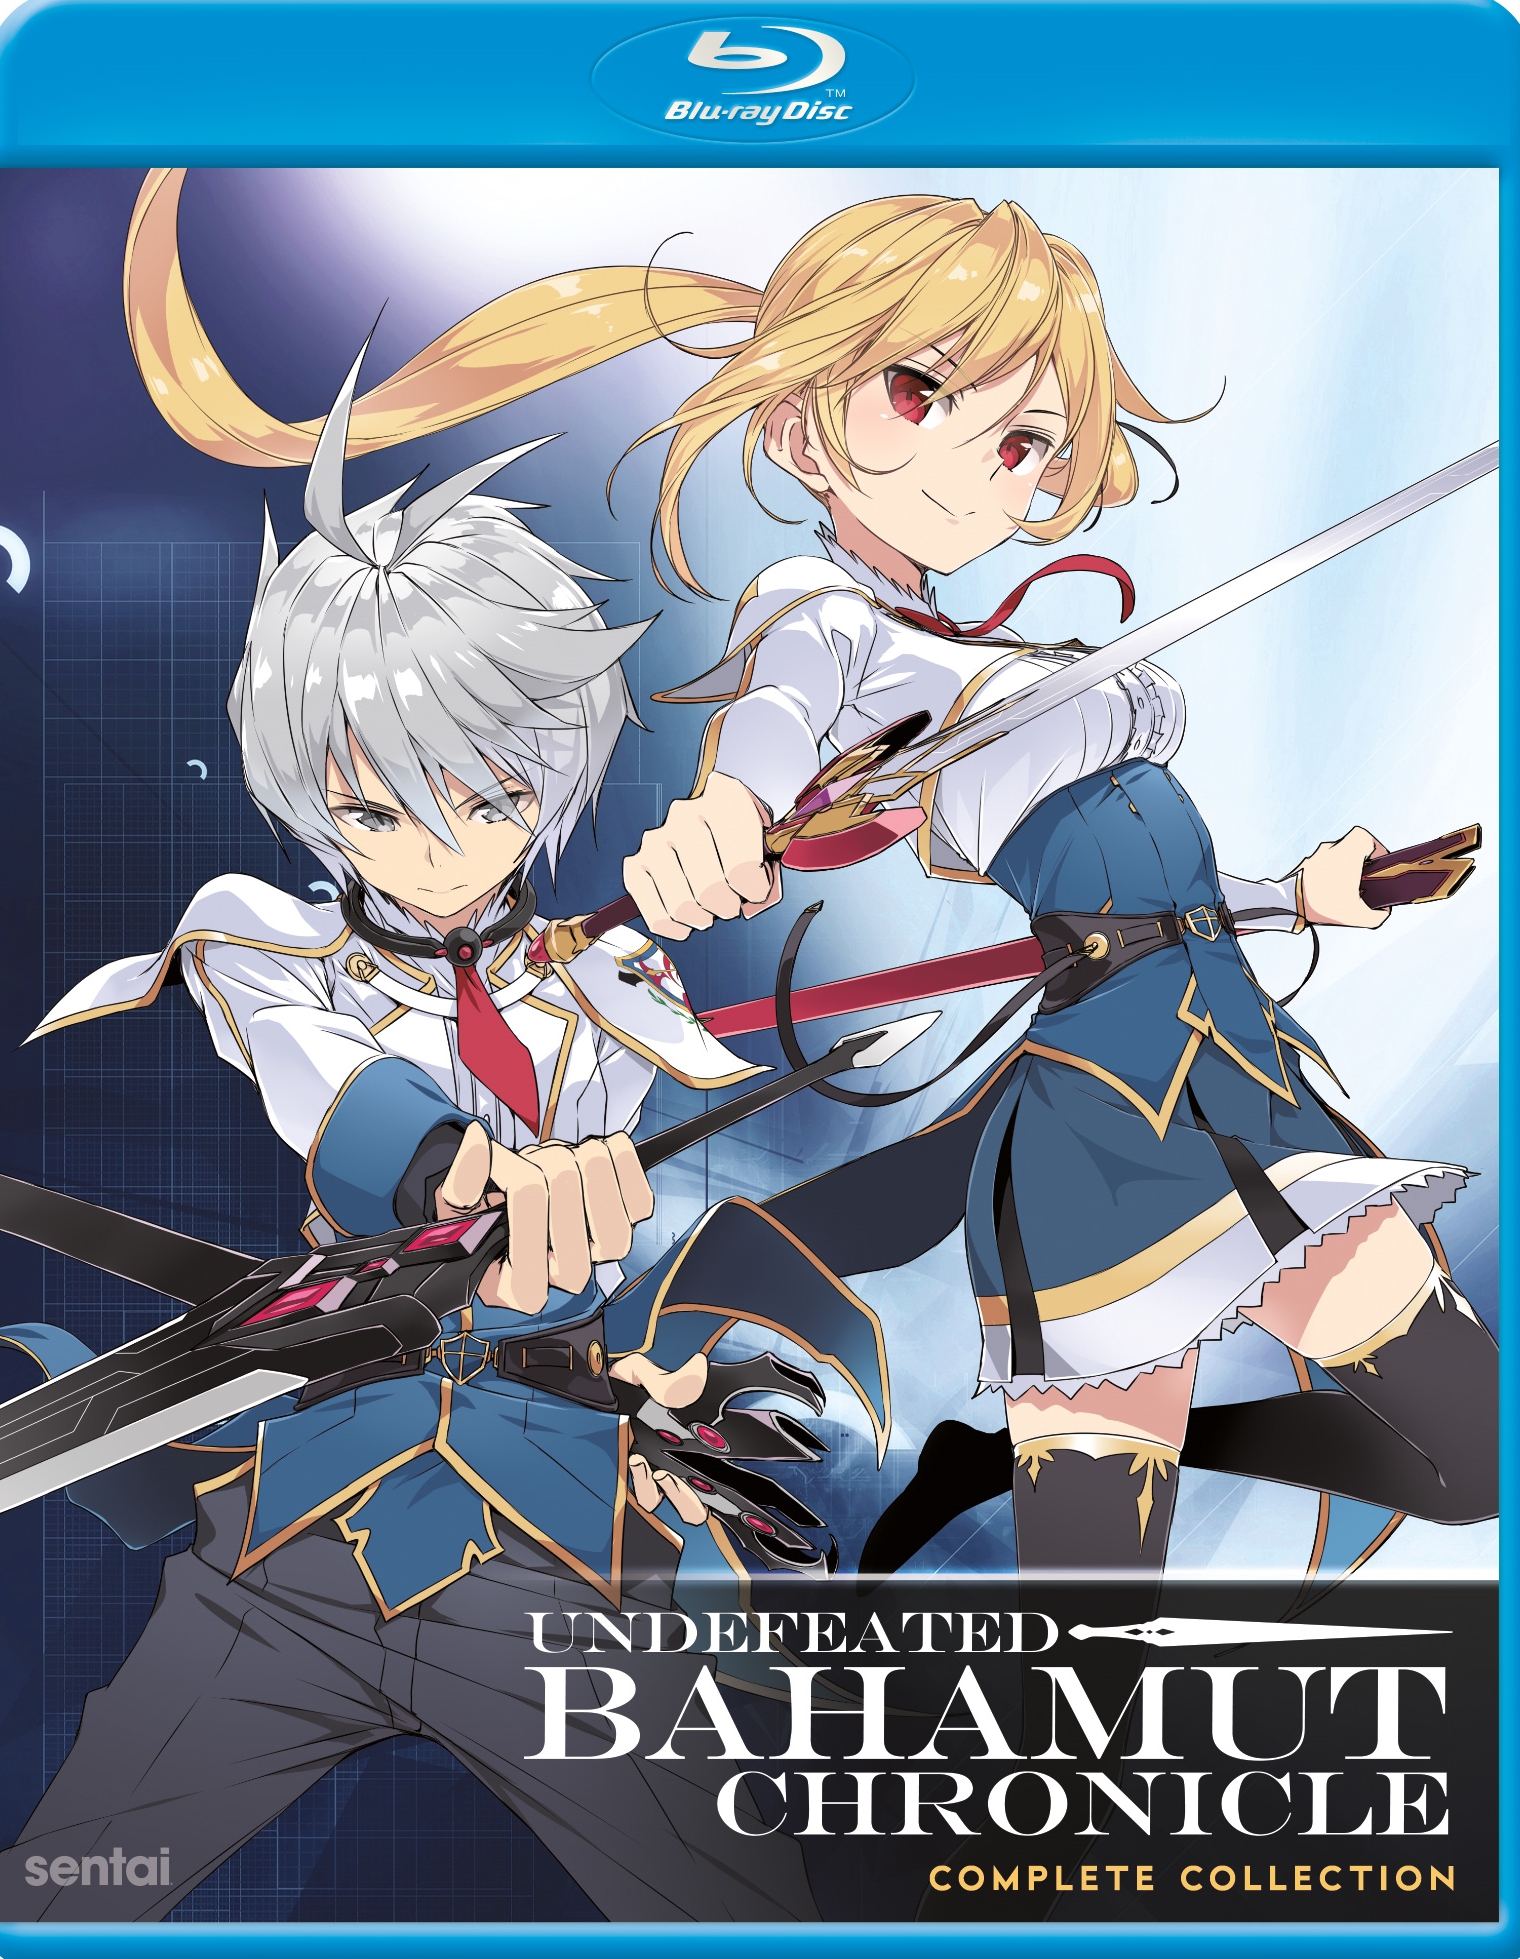 Undefeated Bahamut Chronicle Complete Collection [blu Ray] Best Buy